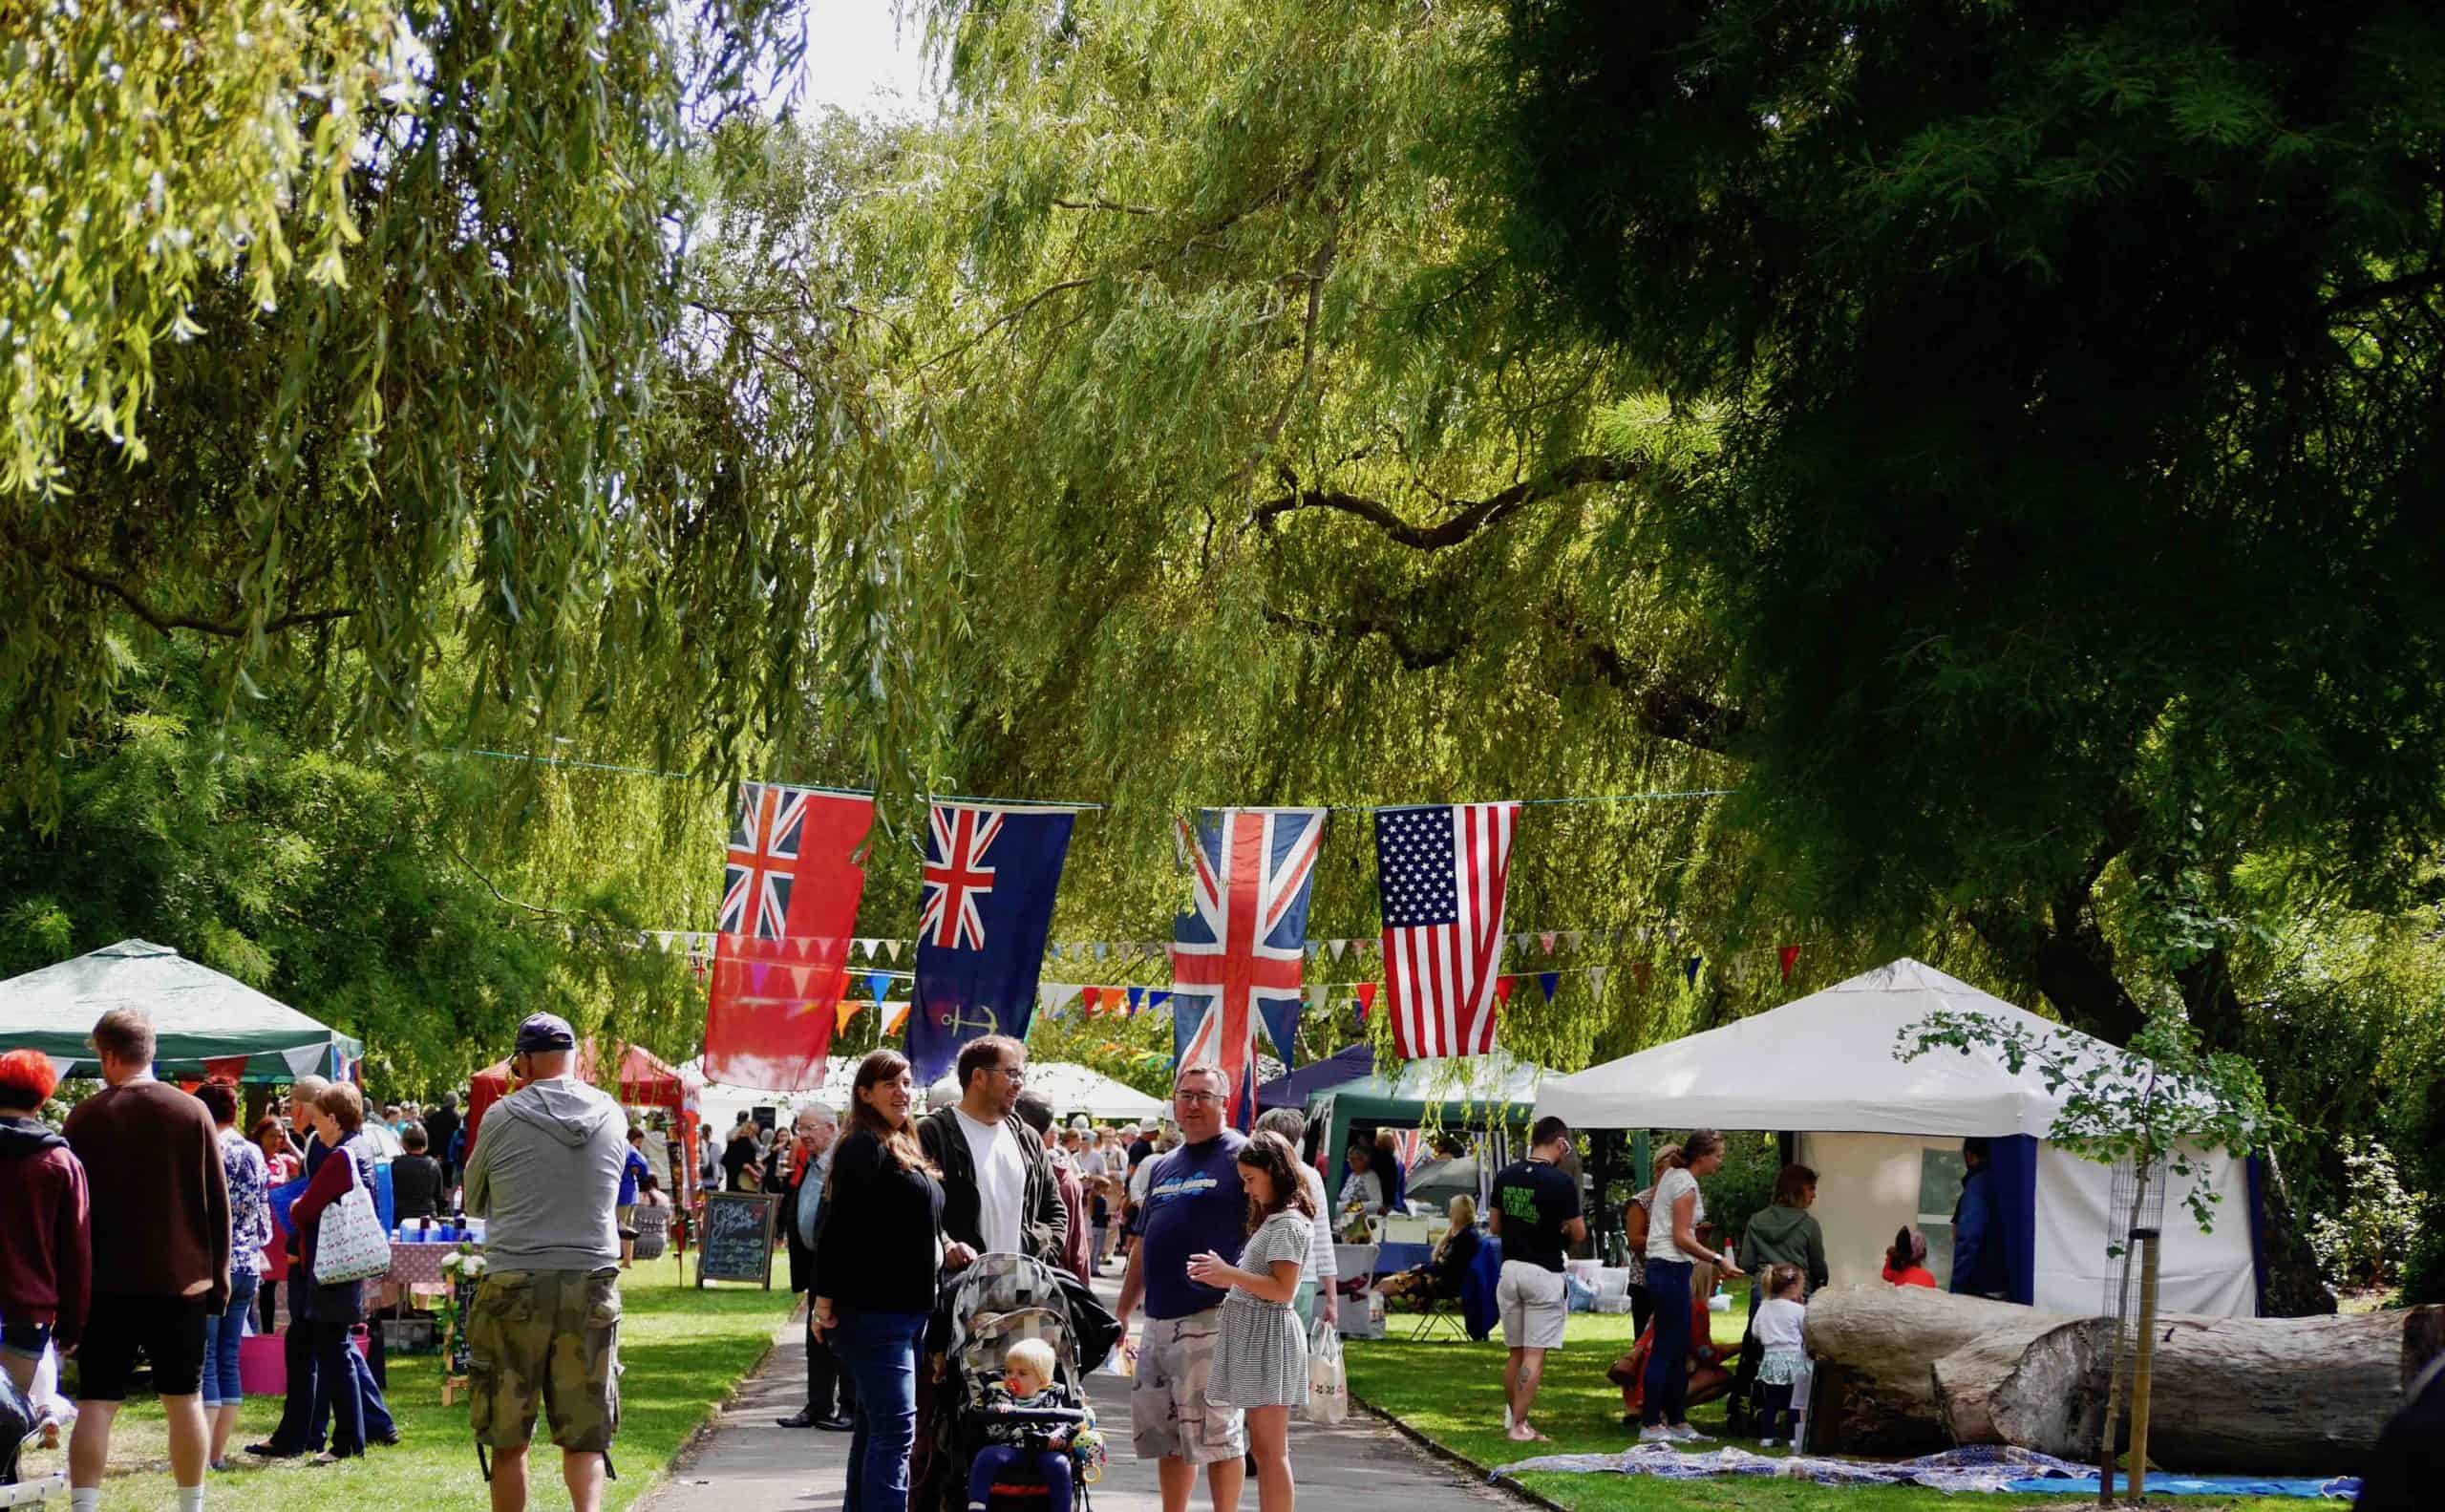 People mingle at a lively outdoor event in a park adorned with British and American flags, true to the WWII style. Stalls, trees, and a sunny sky enhance the festive atmosphere.